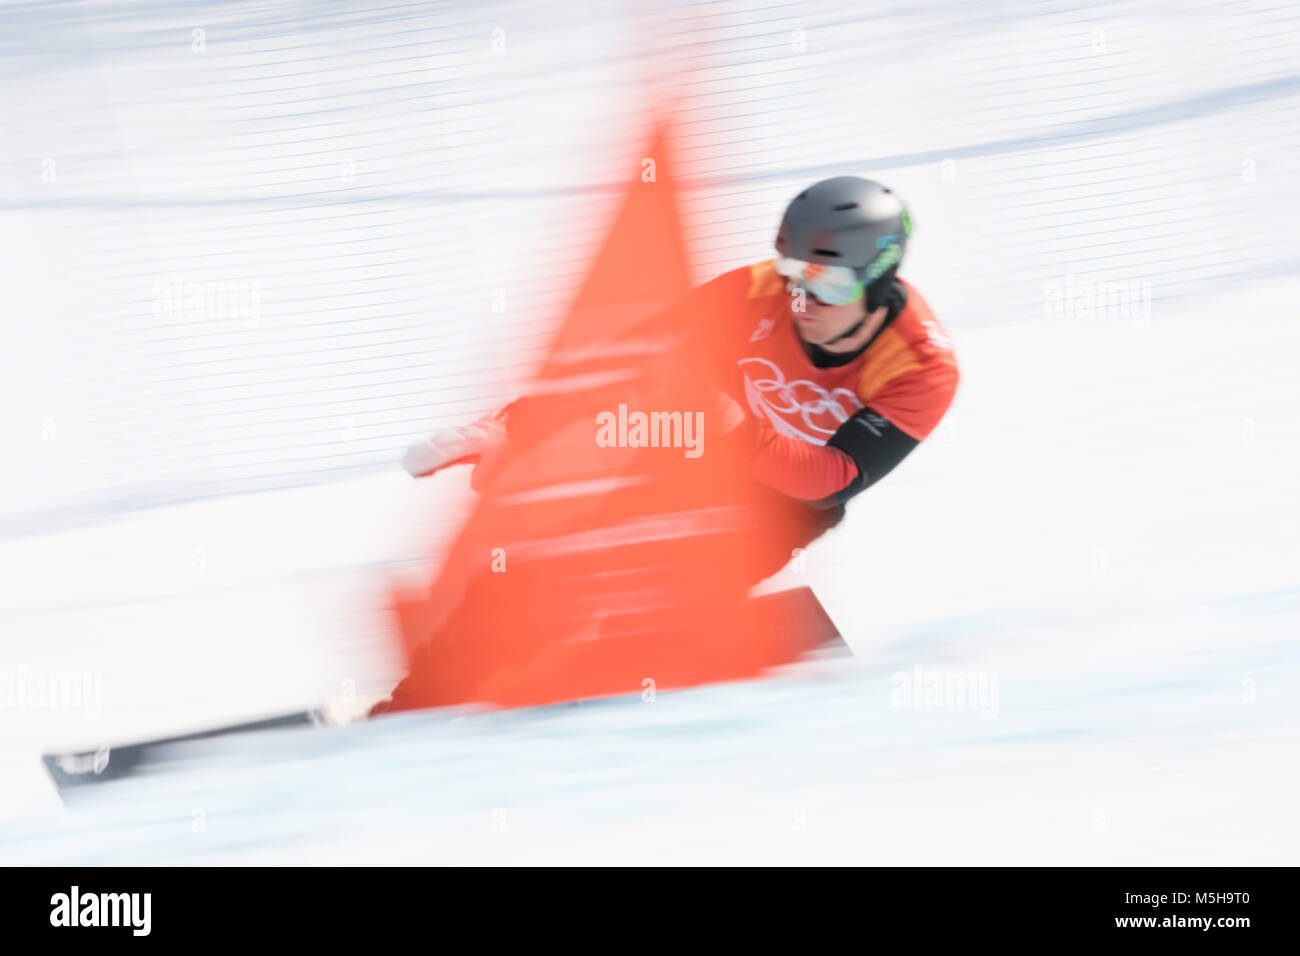 Pyeongchang, South Korea. 24th Feb, 2018. Nevin Galmarini (R) of Switzerland competes during men's parallel giant slalom of snowboard at the 2018 PyeongChang Winter Olympic Games at Phoenix Snow Park, PyeongChang, South Korea, Feb. 24, 2018. Nevin Galmarini won the gold medal in the big final. Credit: Wu Zhuang/Xinhua/Alamy Live News Credit: Xinhua/Alamy Live News Stock Photo